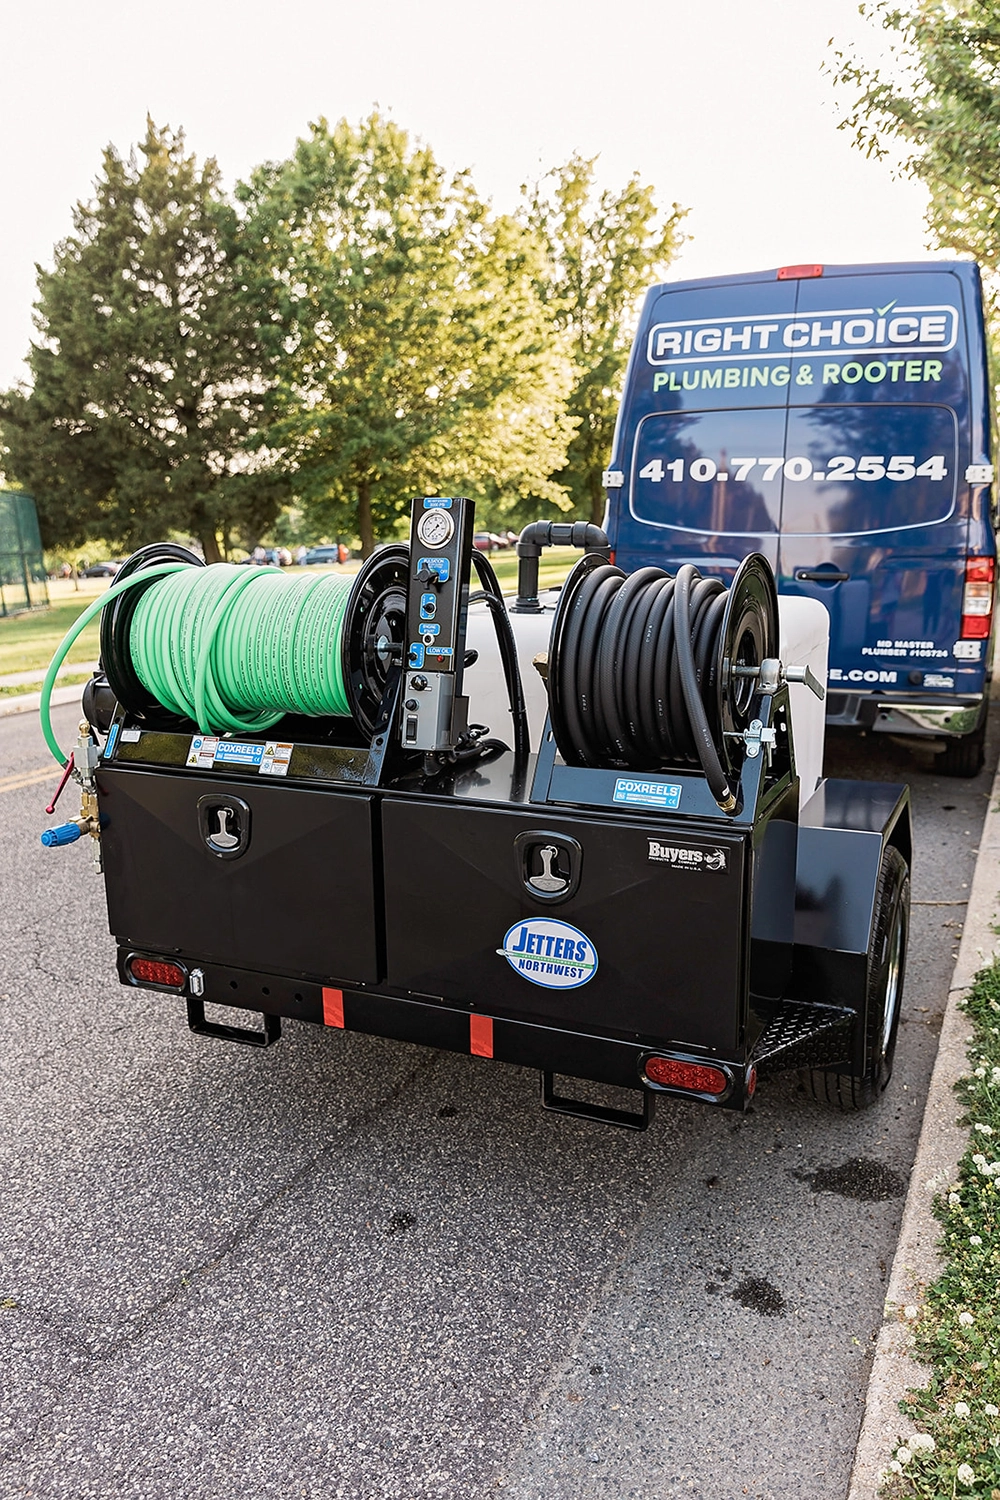 Right Choice Plumbing And Rooter Jetter